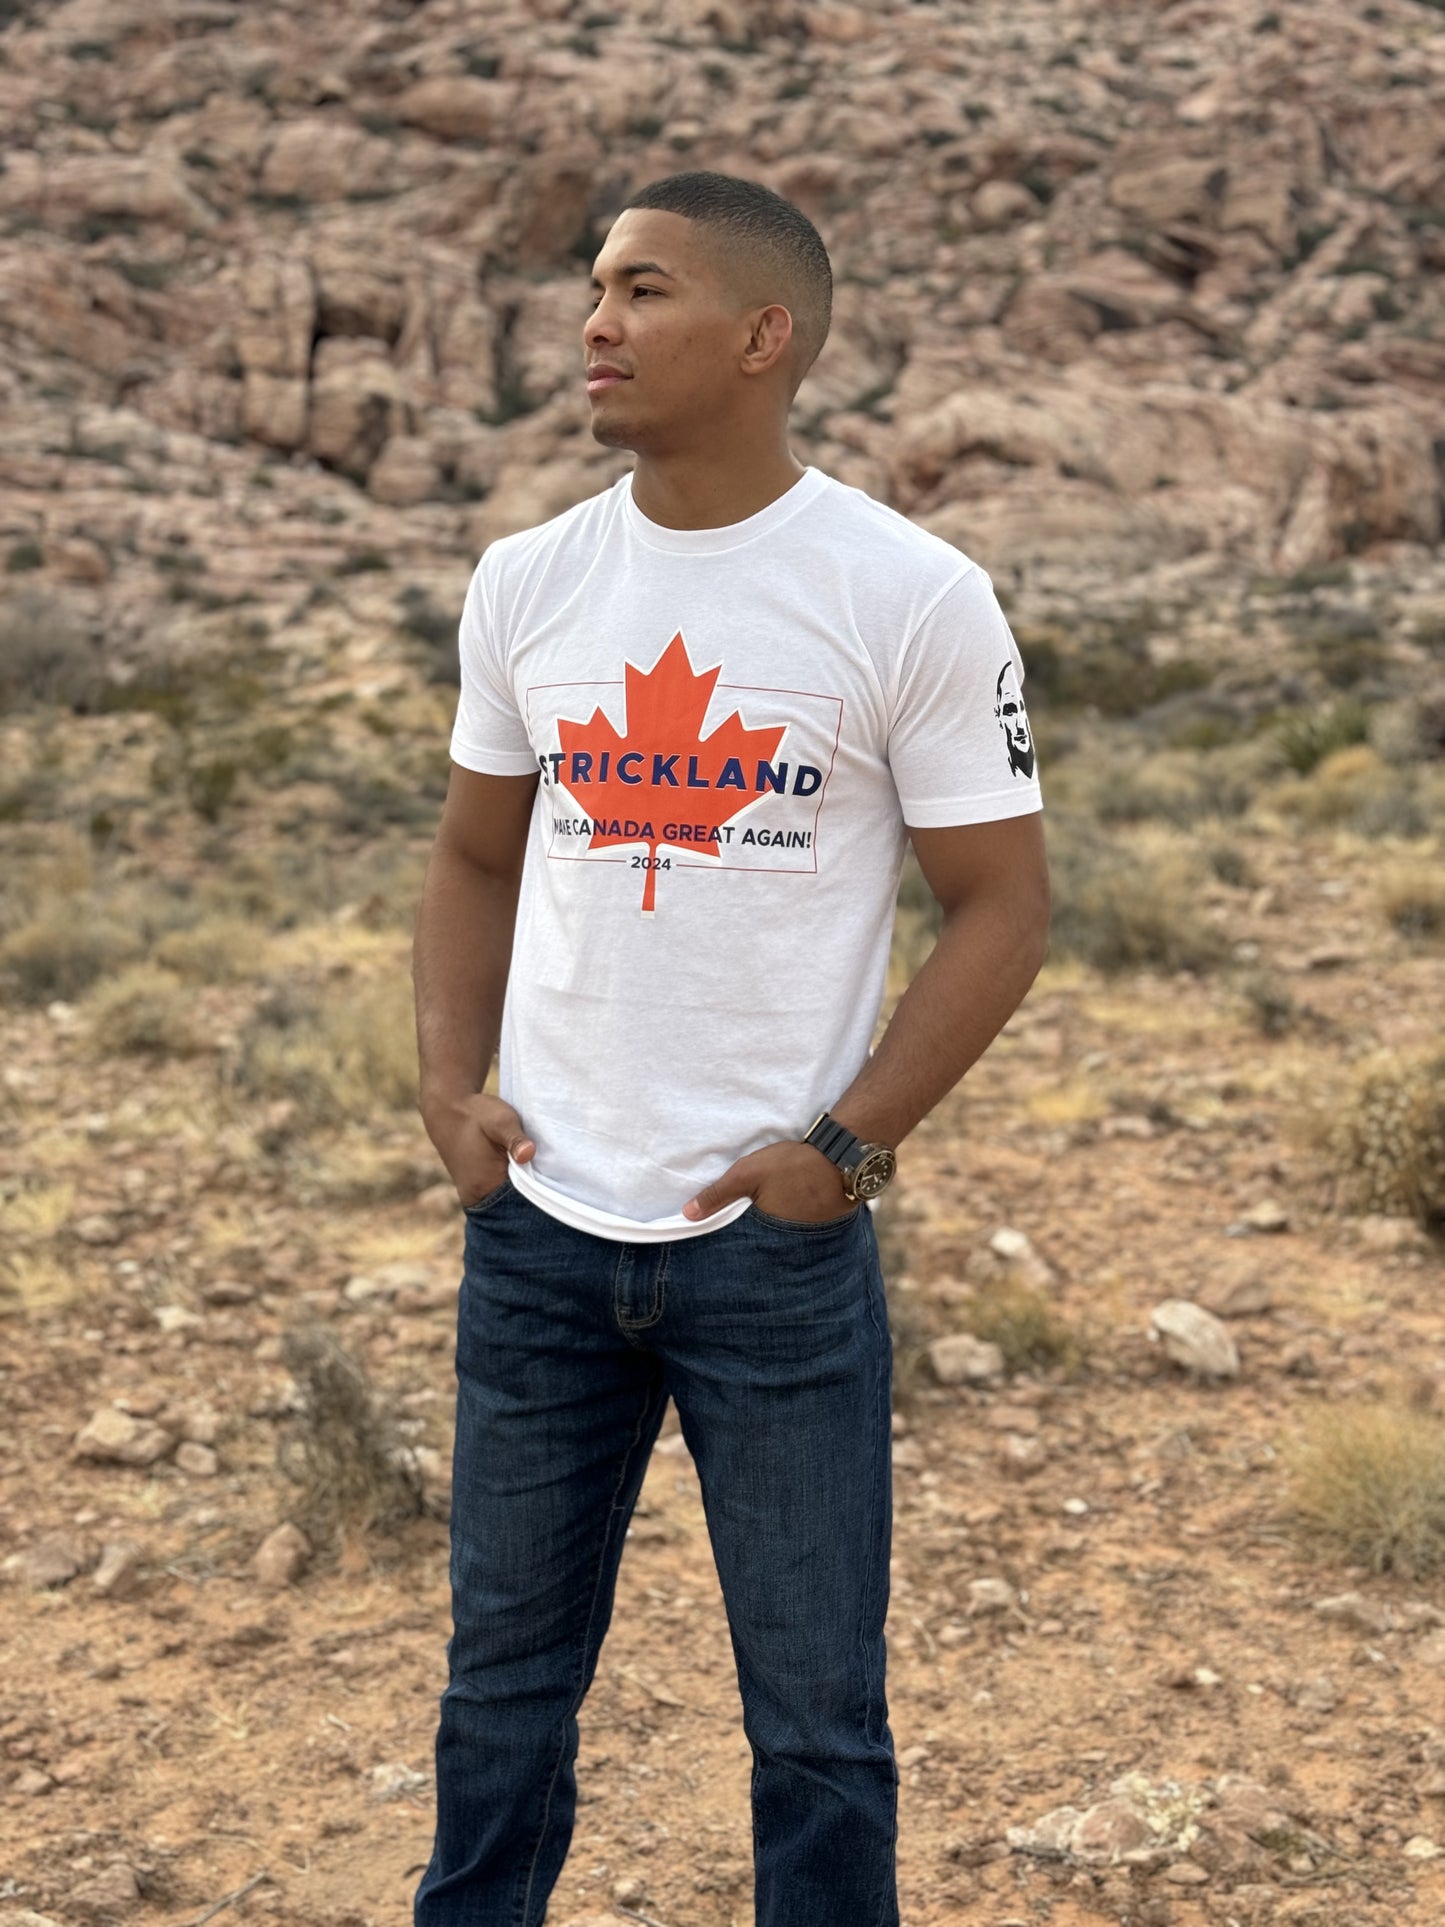 2024 Canadian Campaign Tee